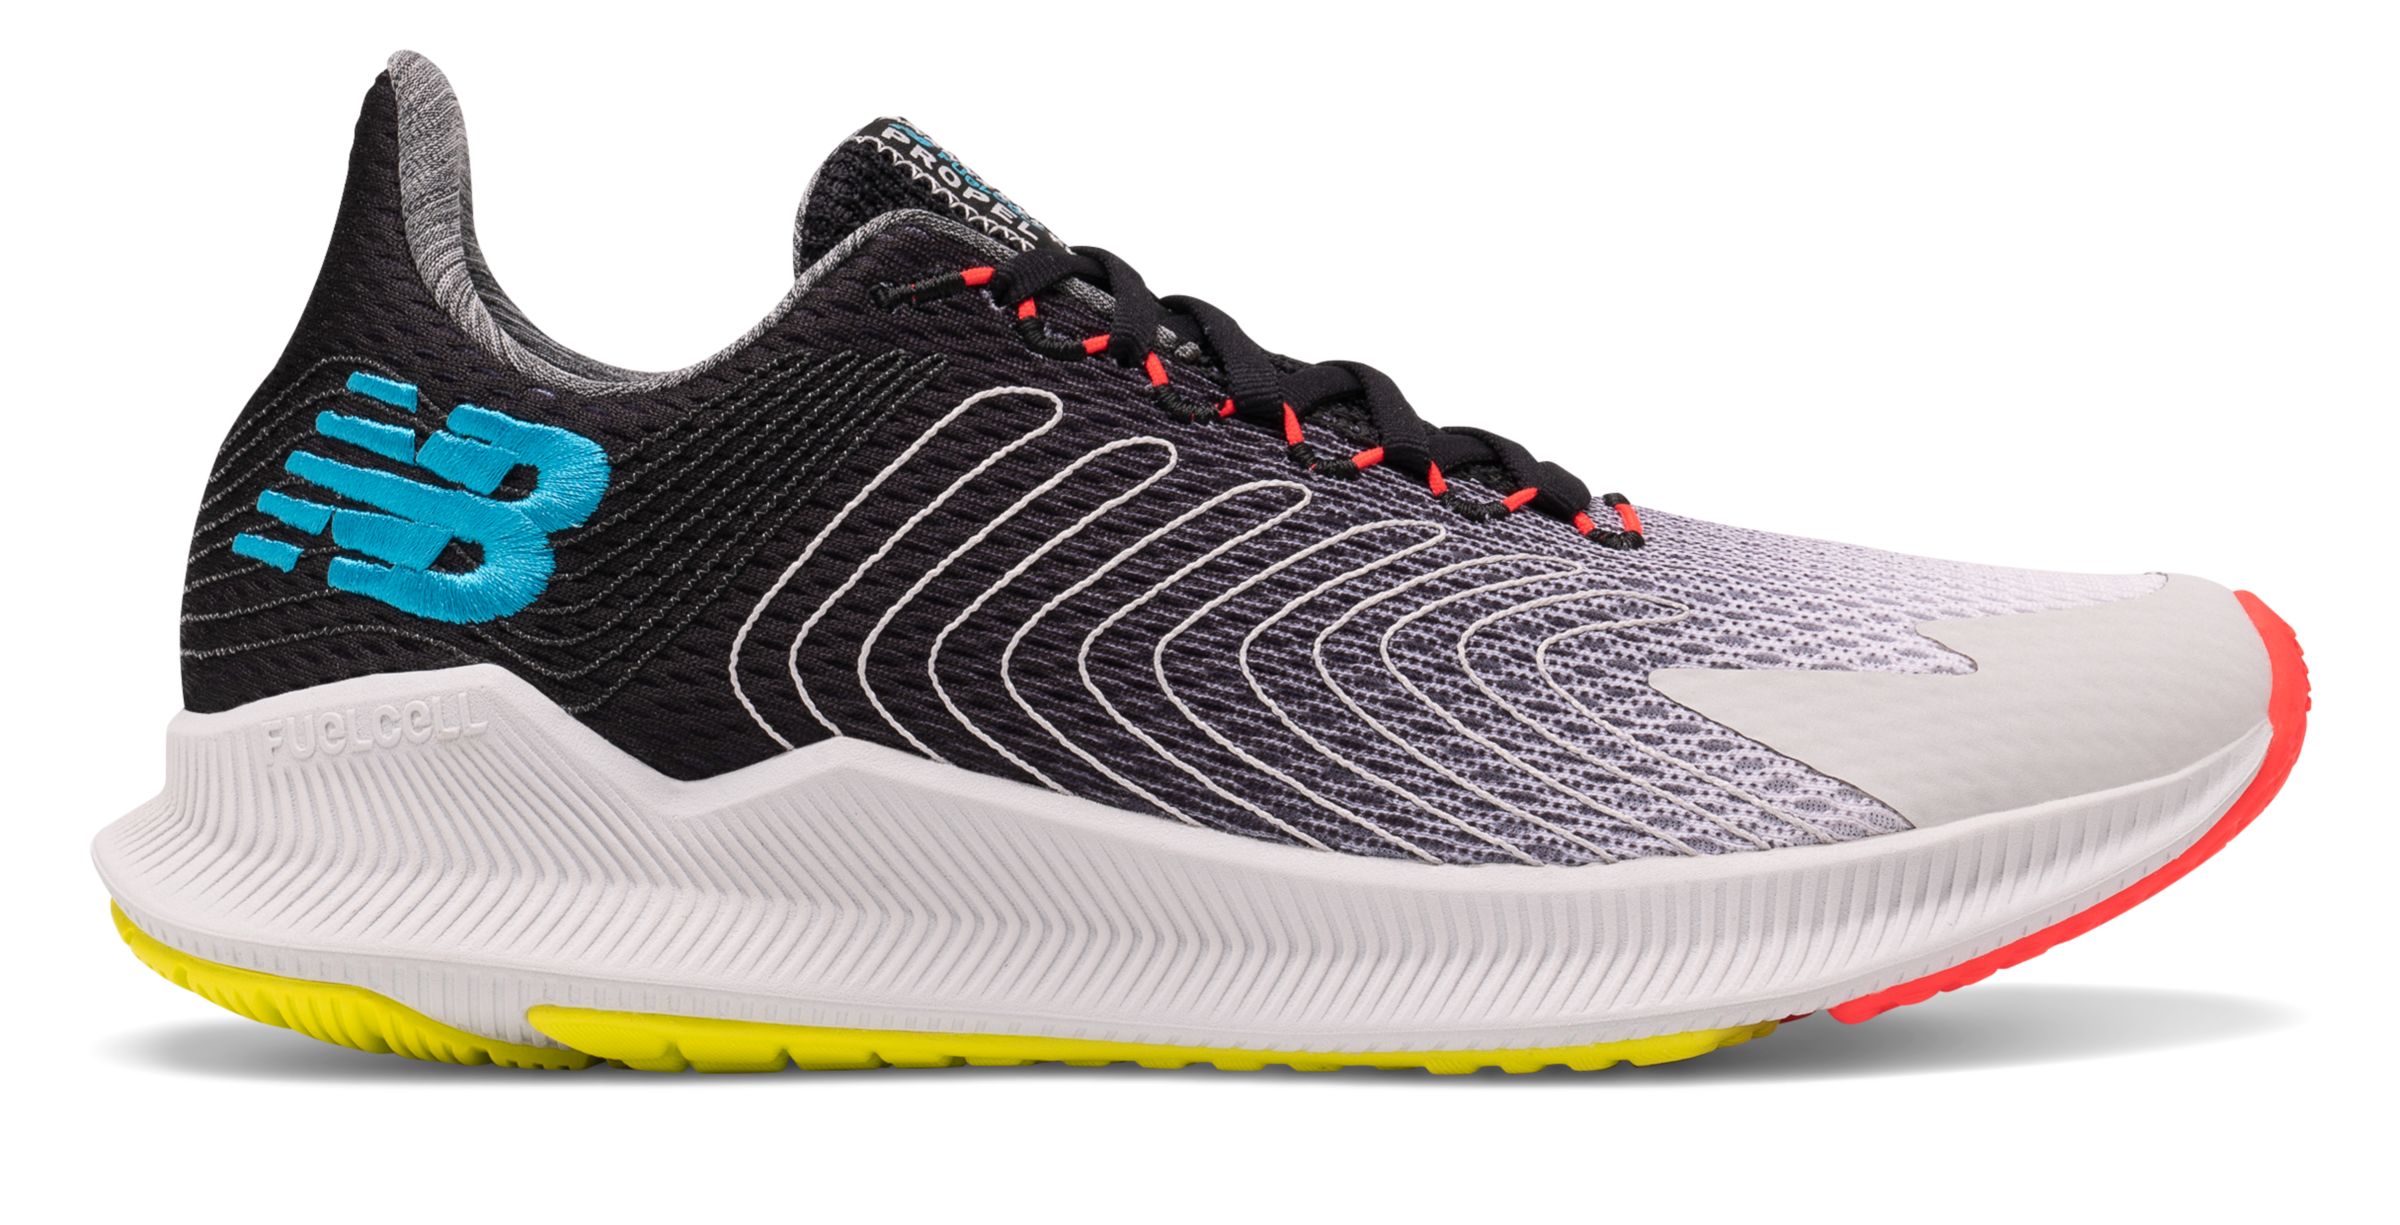 Men's FuelCell Propel Running Shoes - New Balance